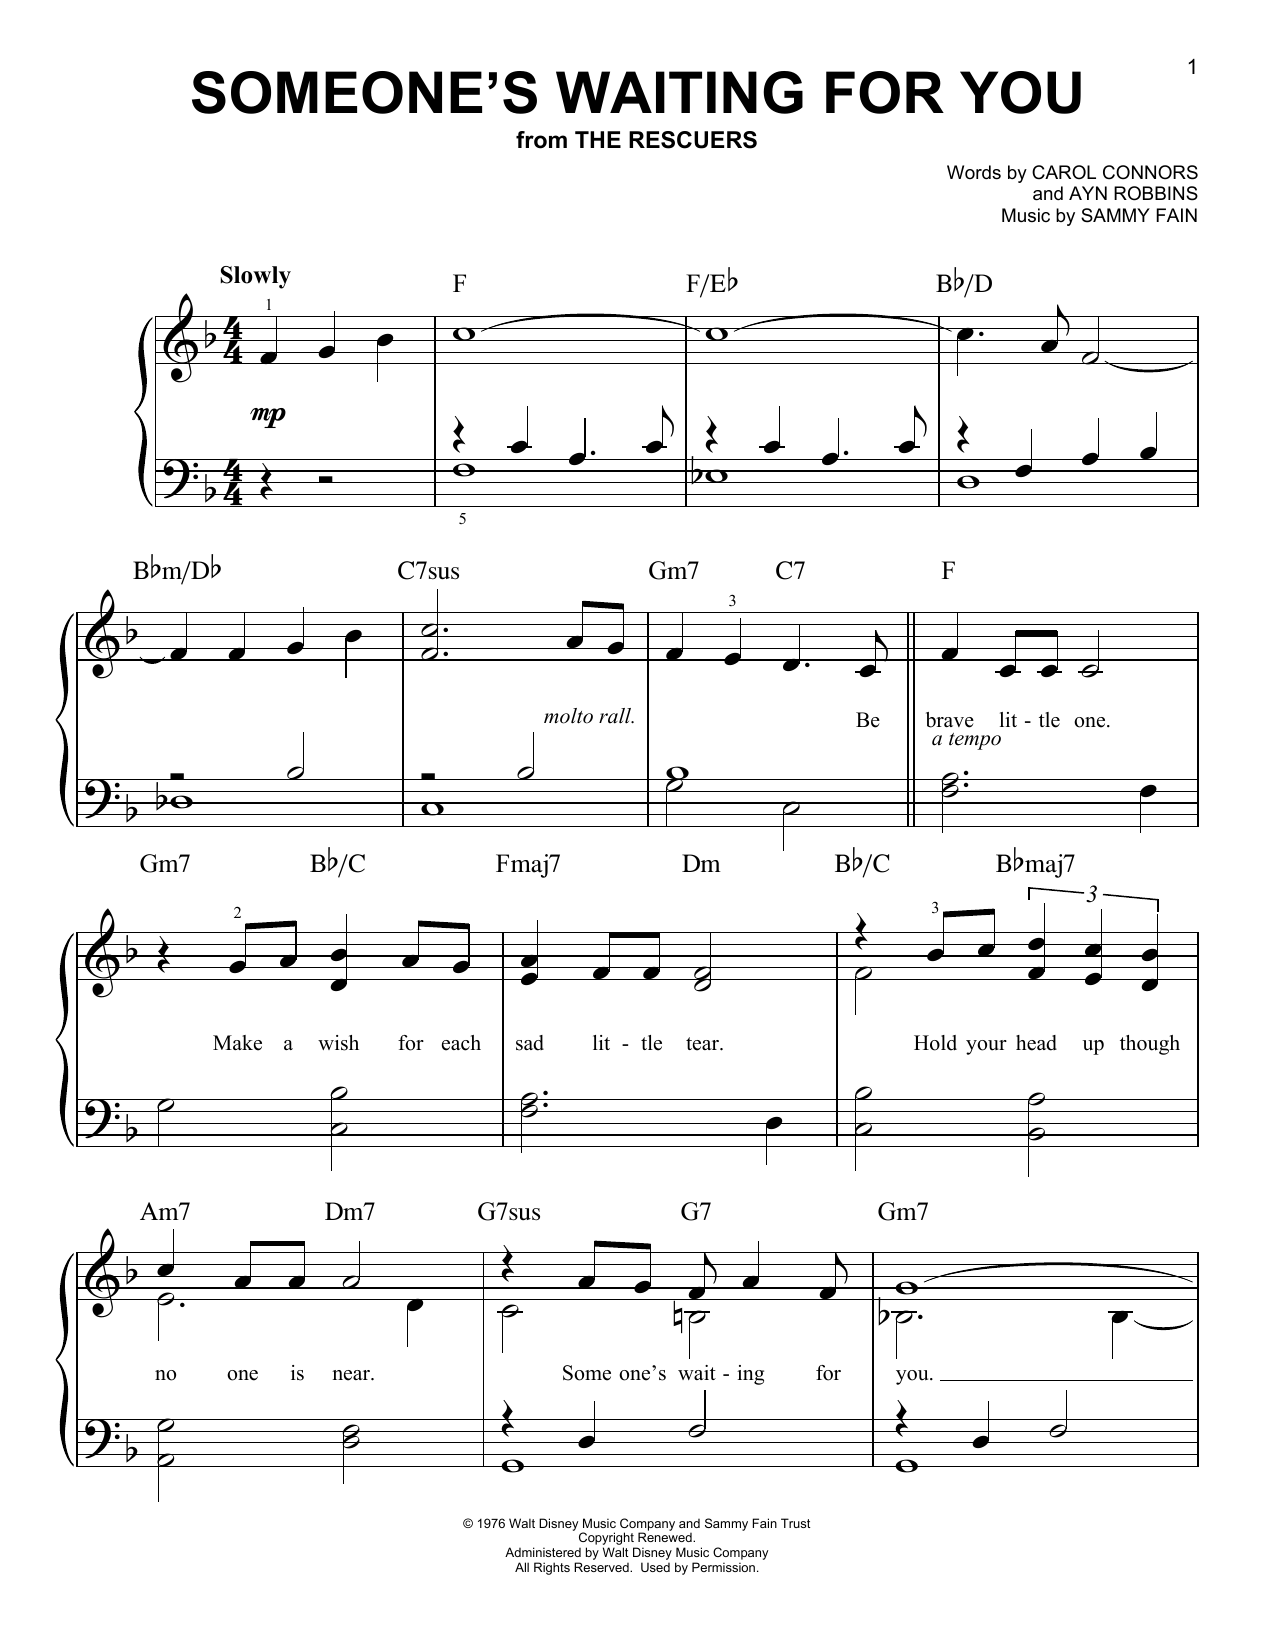 Download Ayn Robbins Someone's Waiting For You Sheet Music